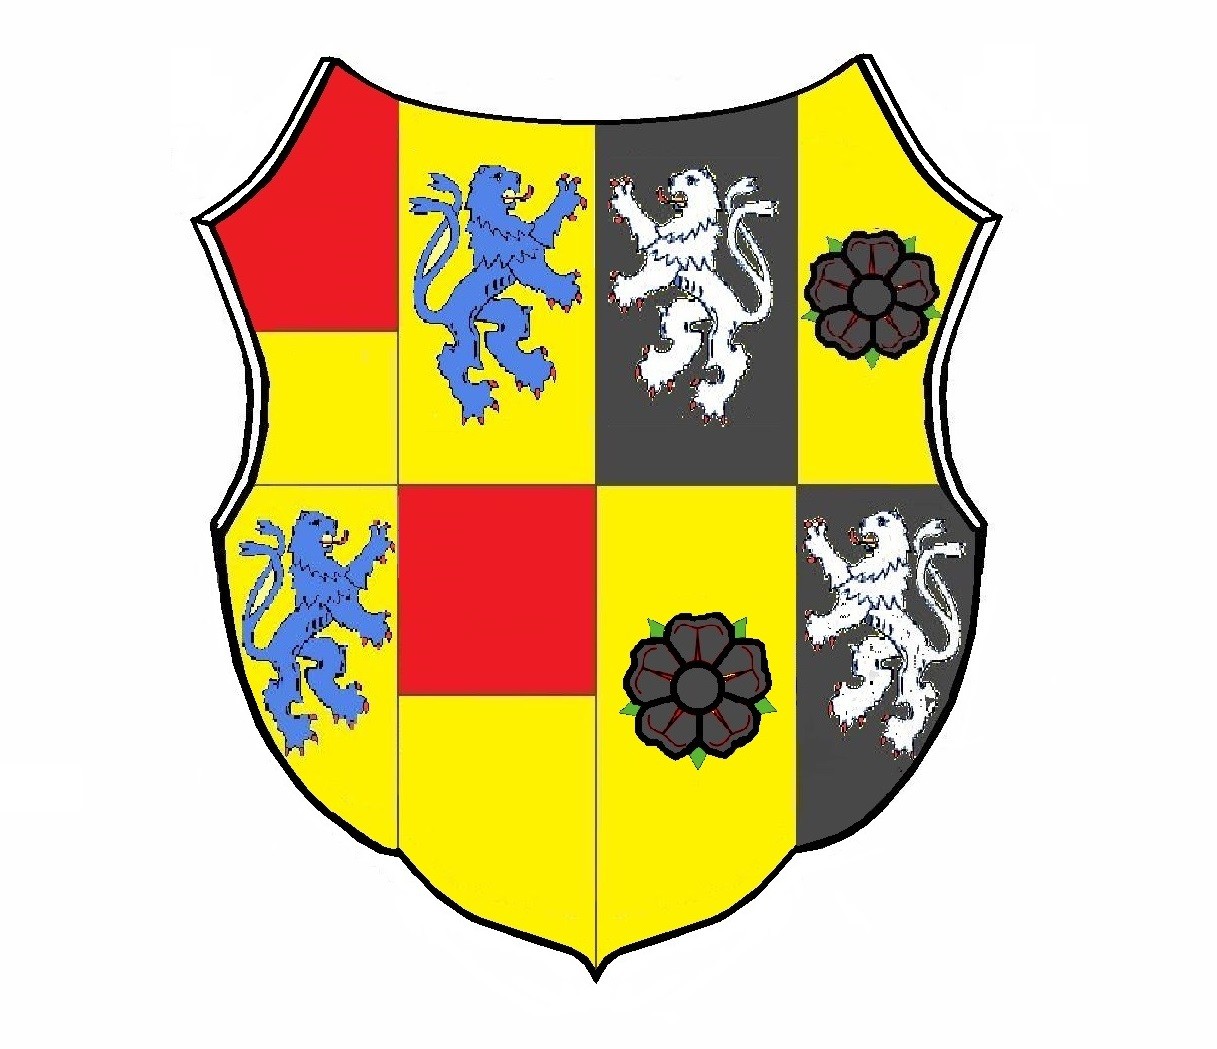 Wappen Solms (Wikimedia.org CC BY-NC-SA)